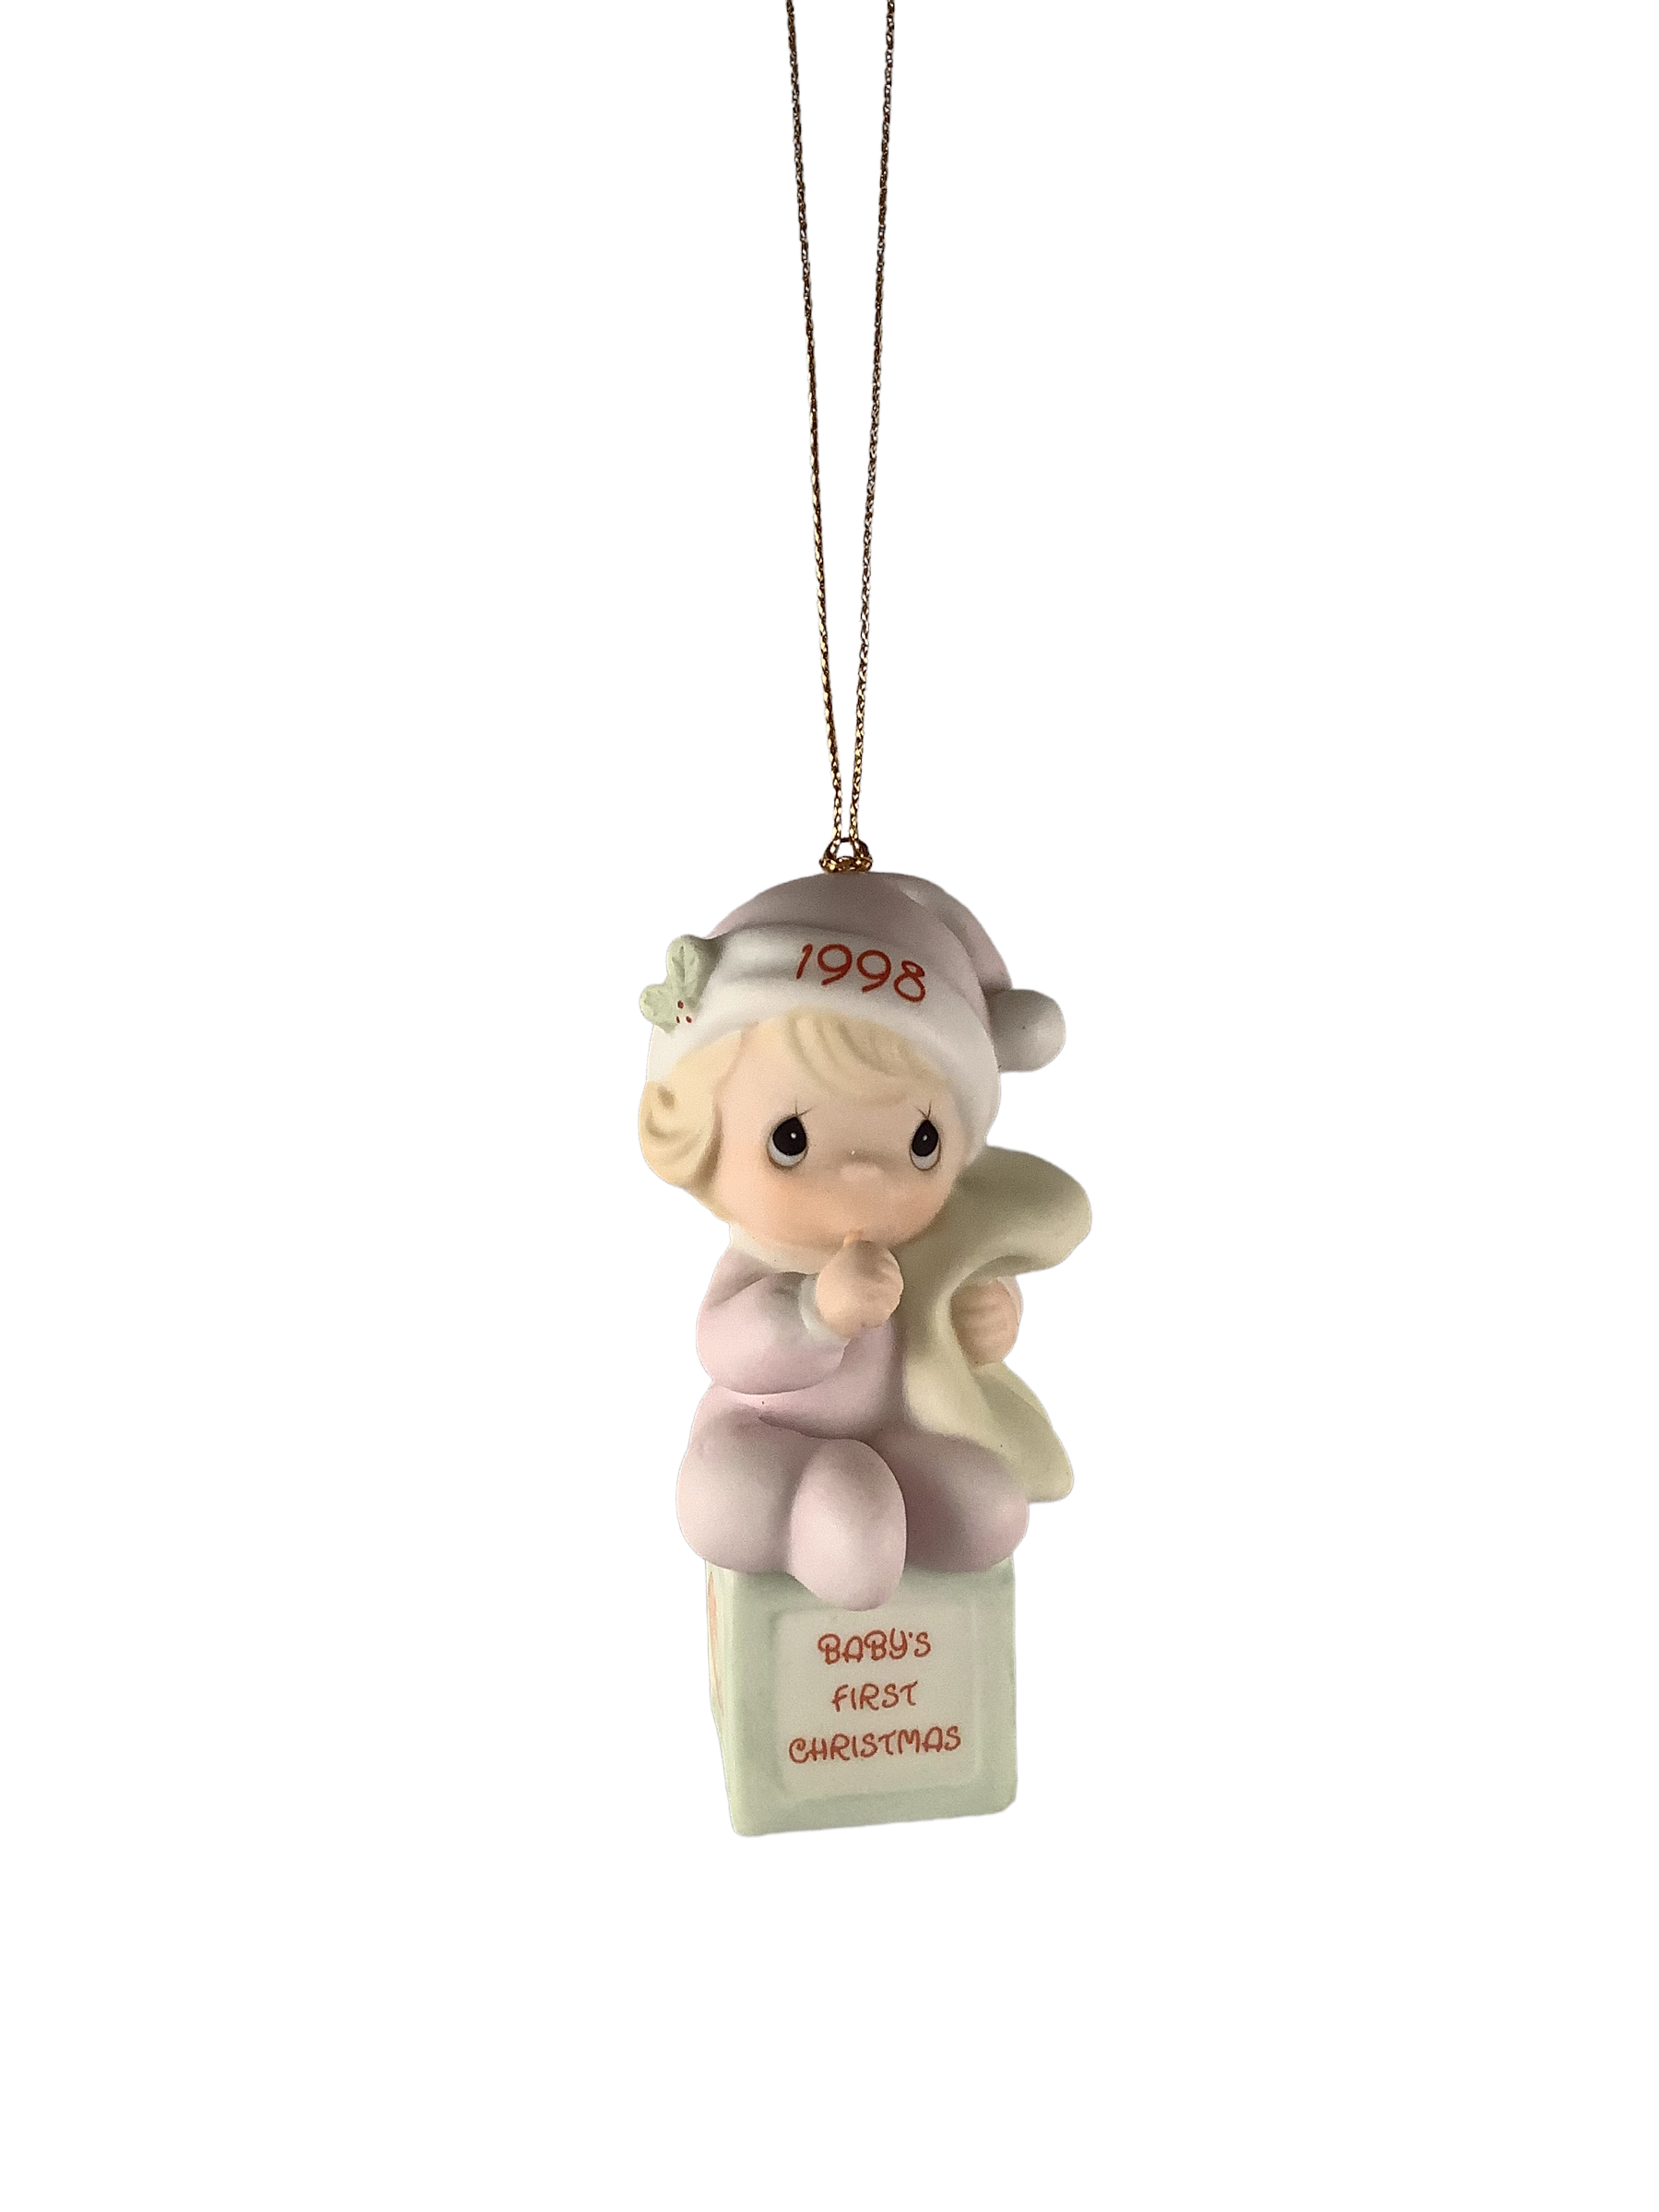 Baby's First Christmas 1998 (Girl) - Precious Moment Ornament